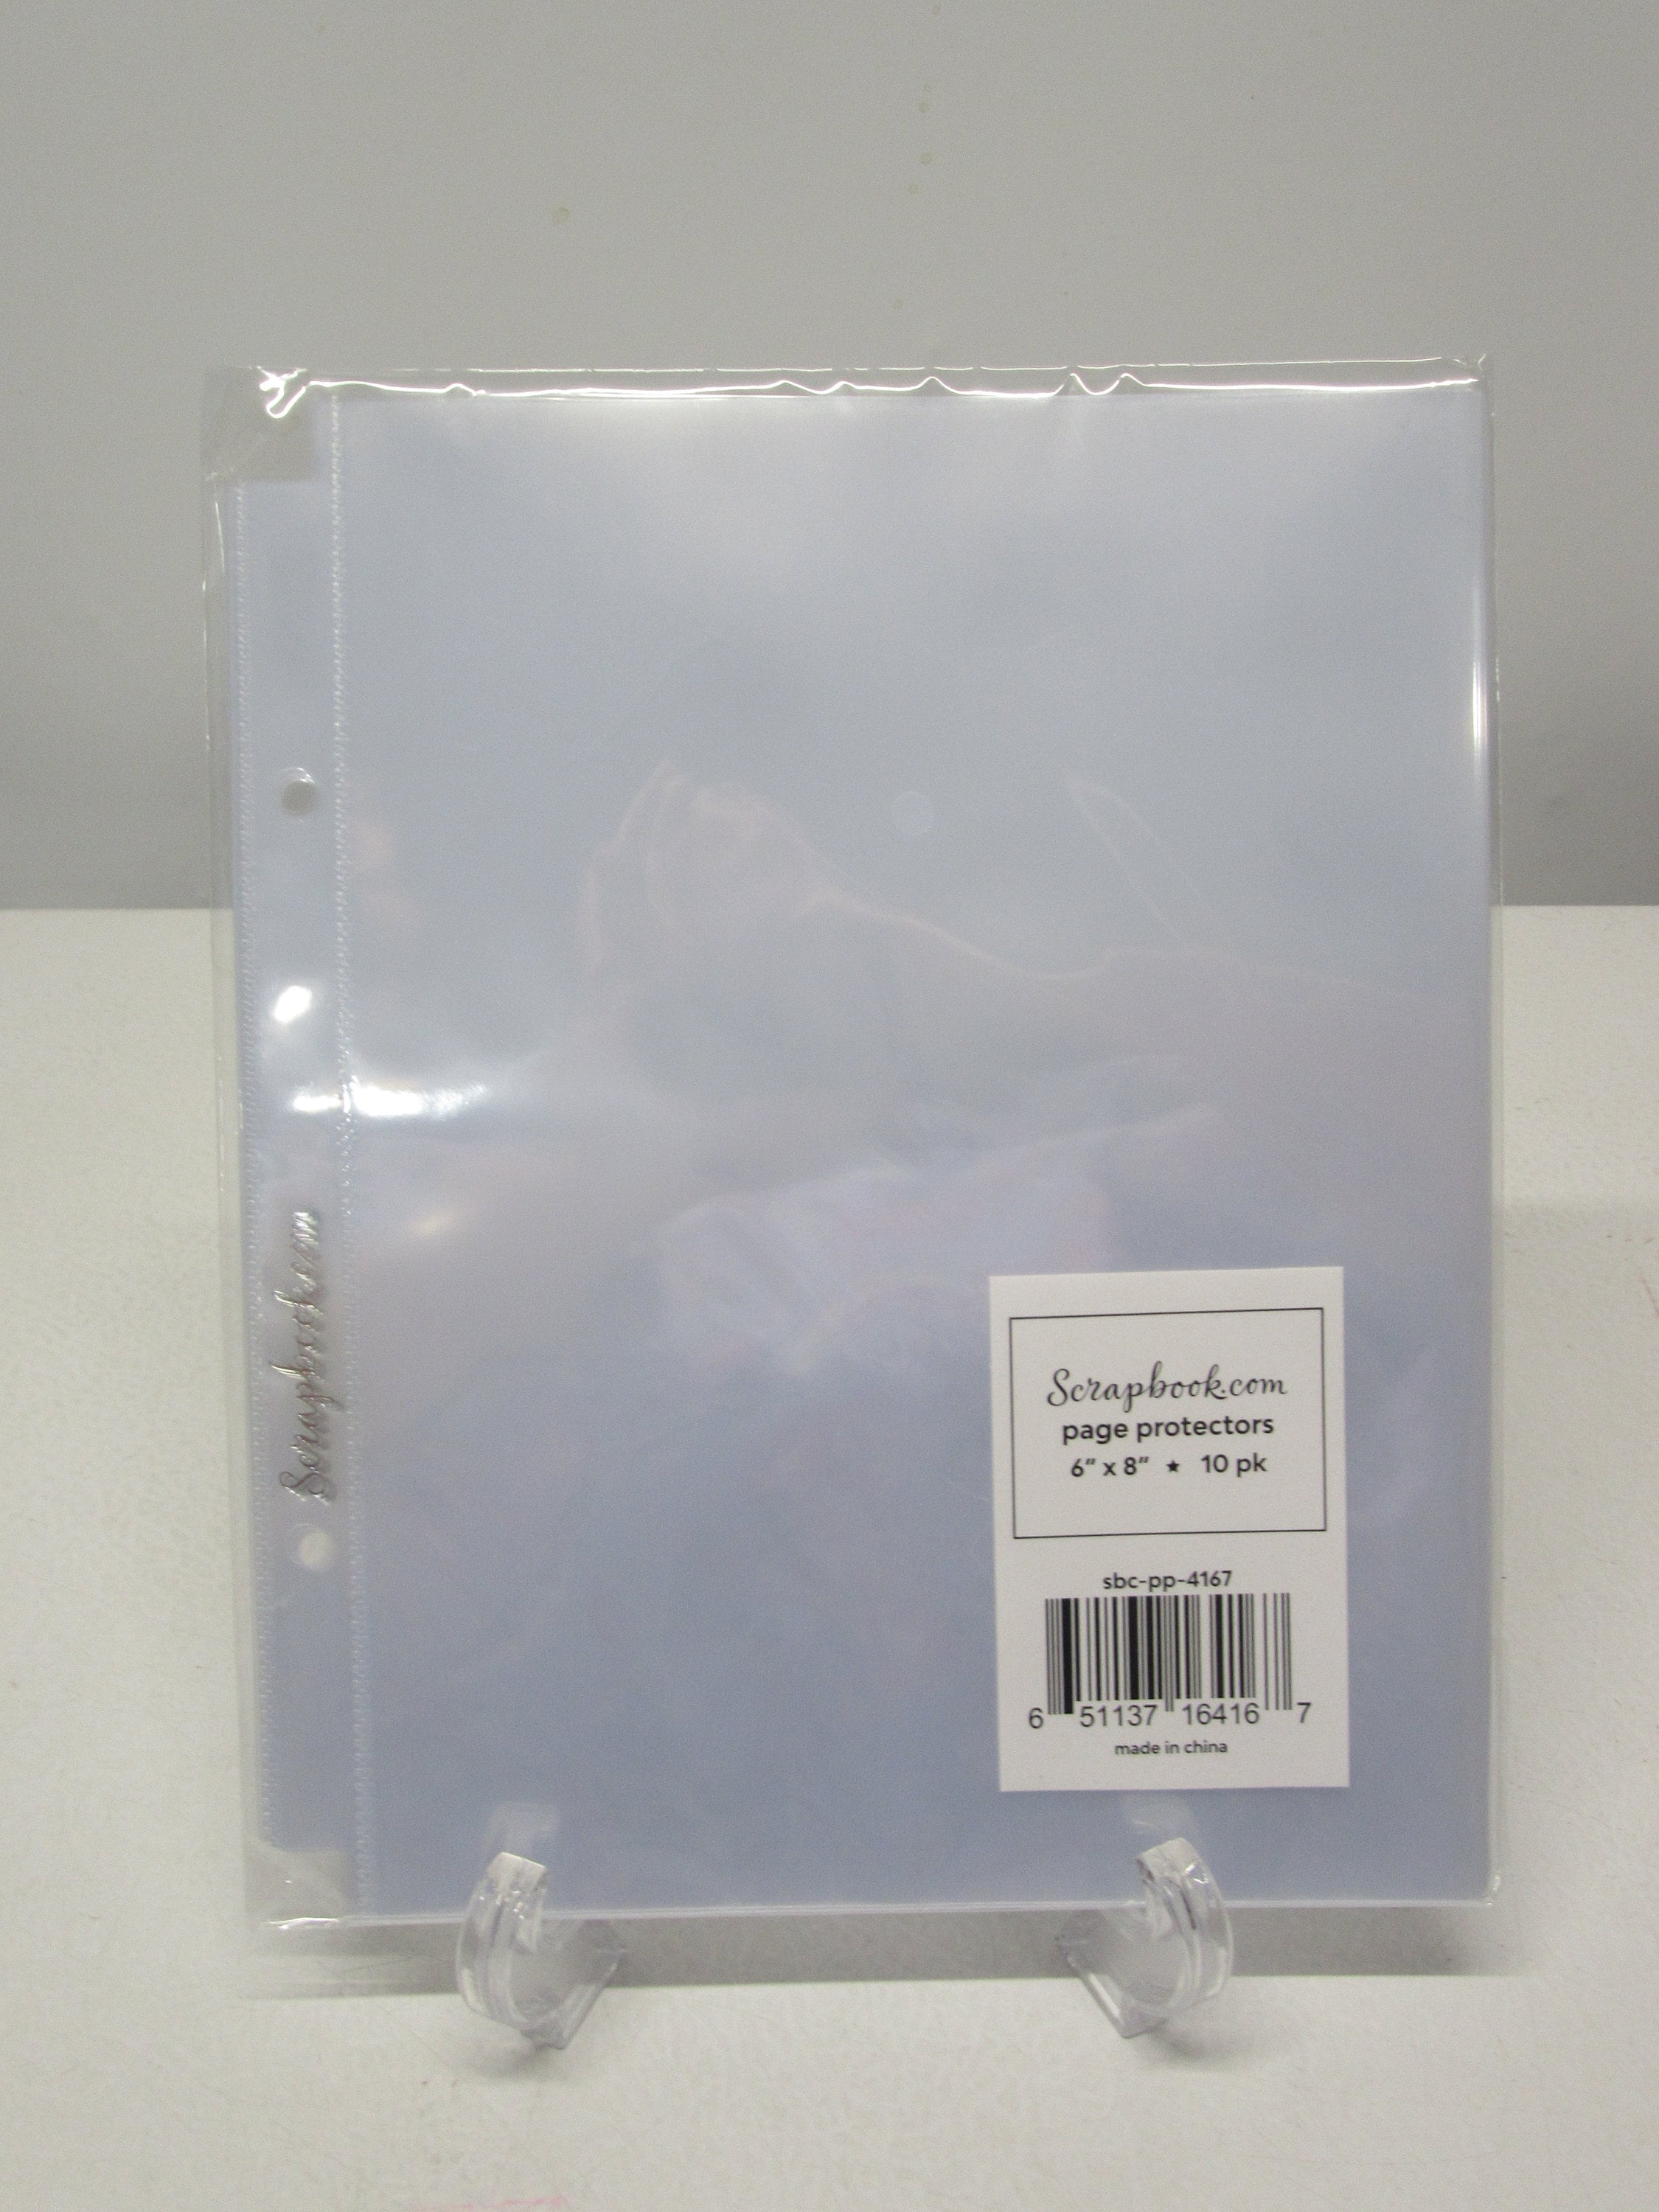 8.5 x 11 Rigid Clear Toploaders - Durable PVC Document Protectors, Plastic  Sleeves for Photos, Prints, and Menu Covers, 10 Pack - Yahoo Shopping